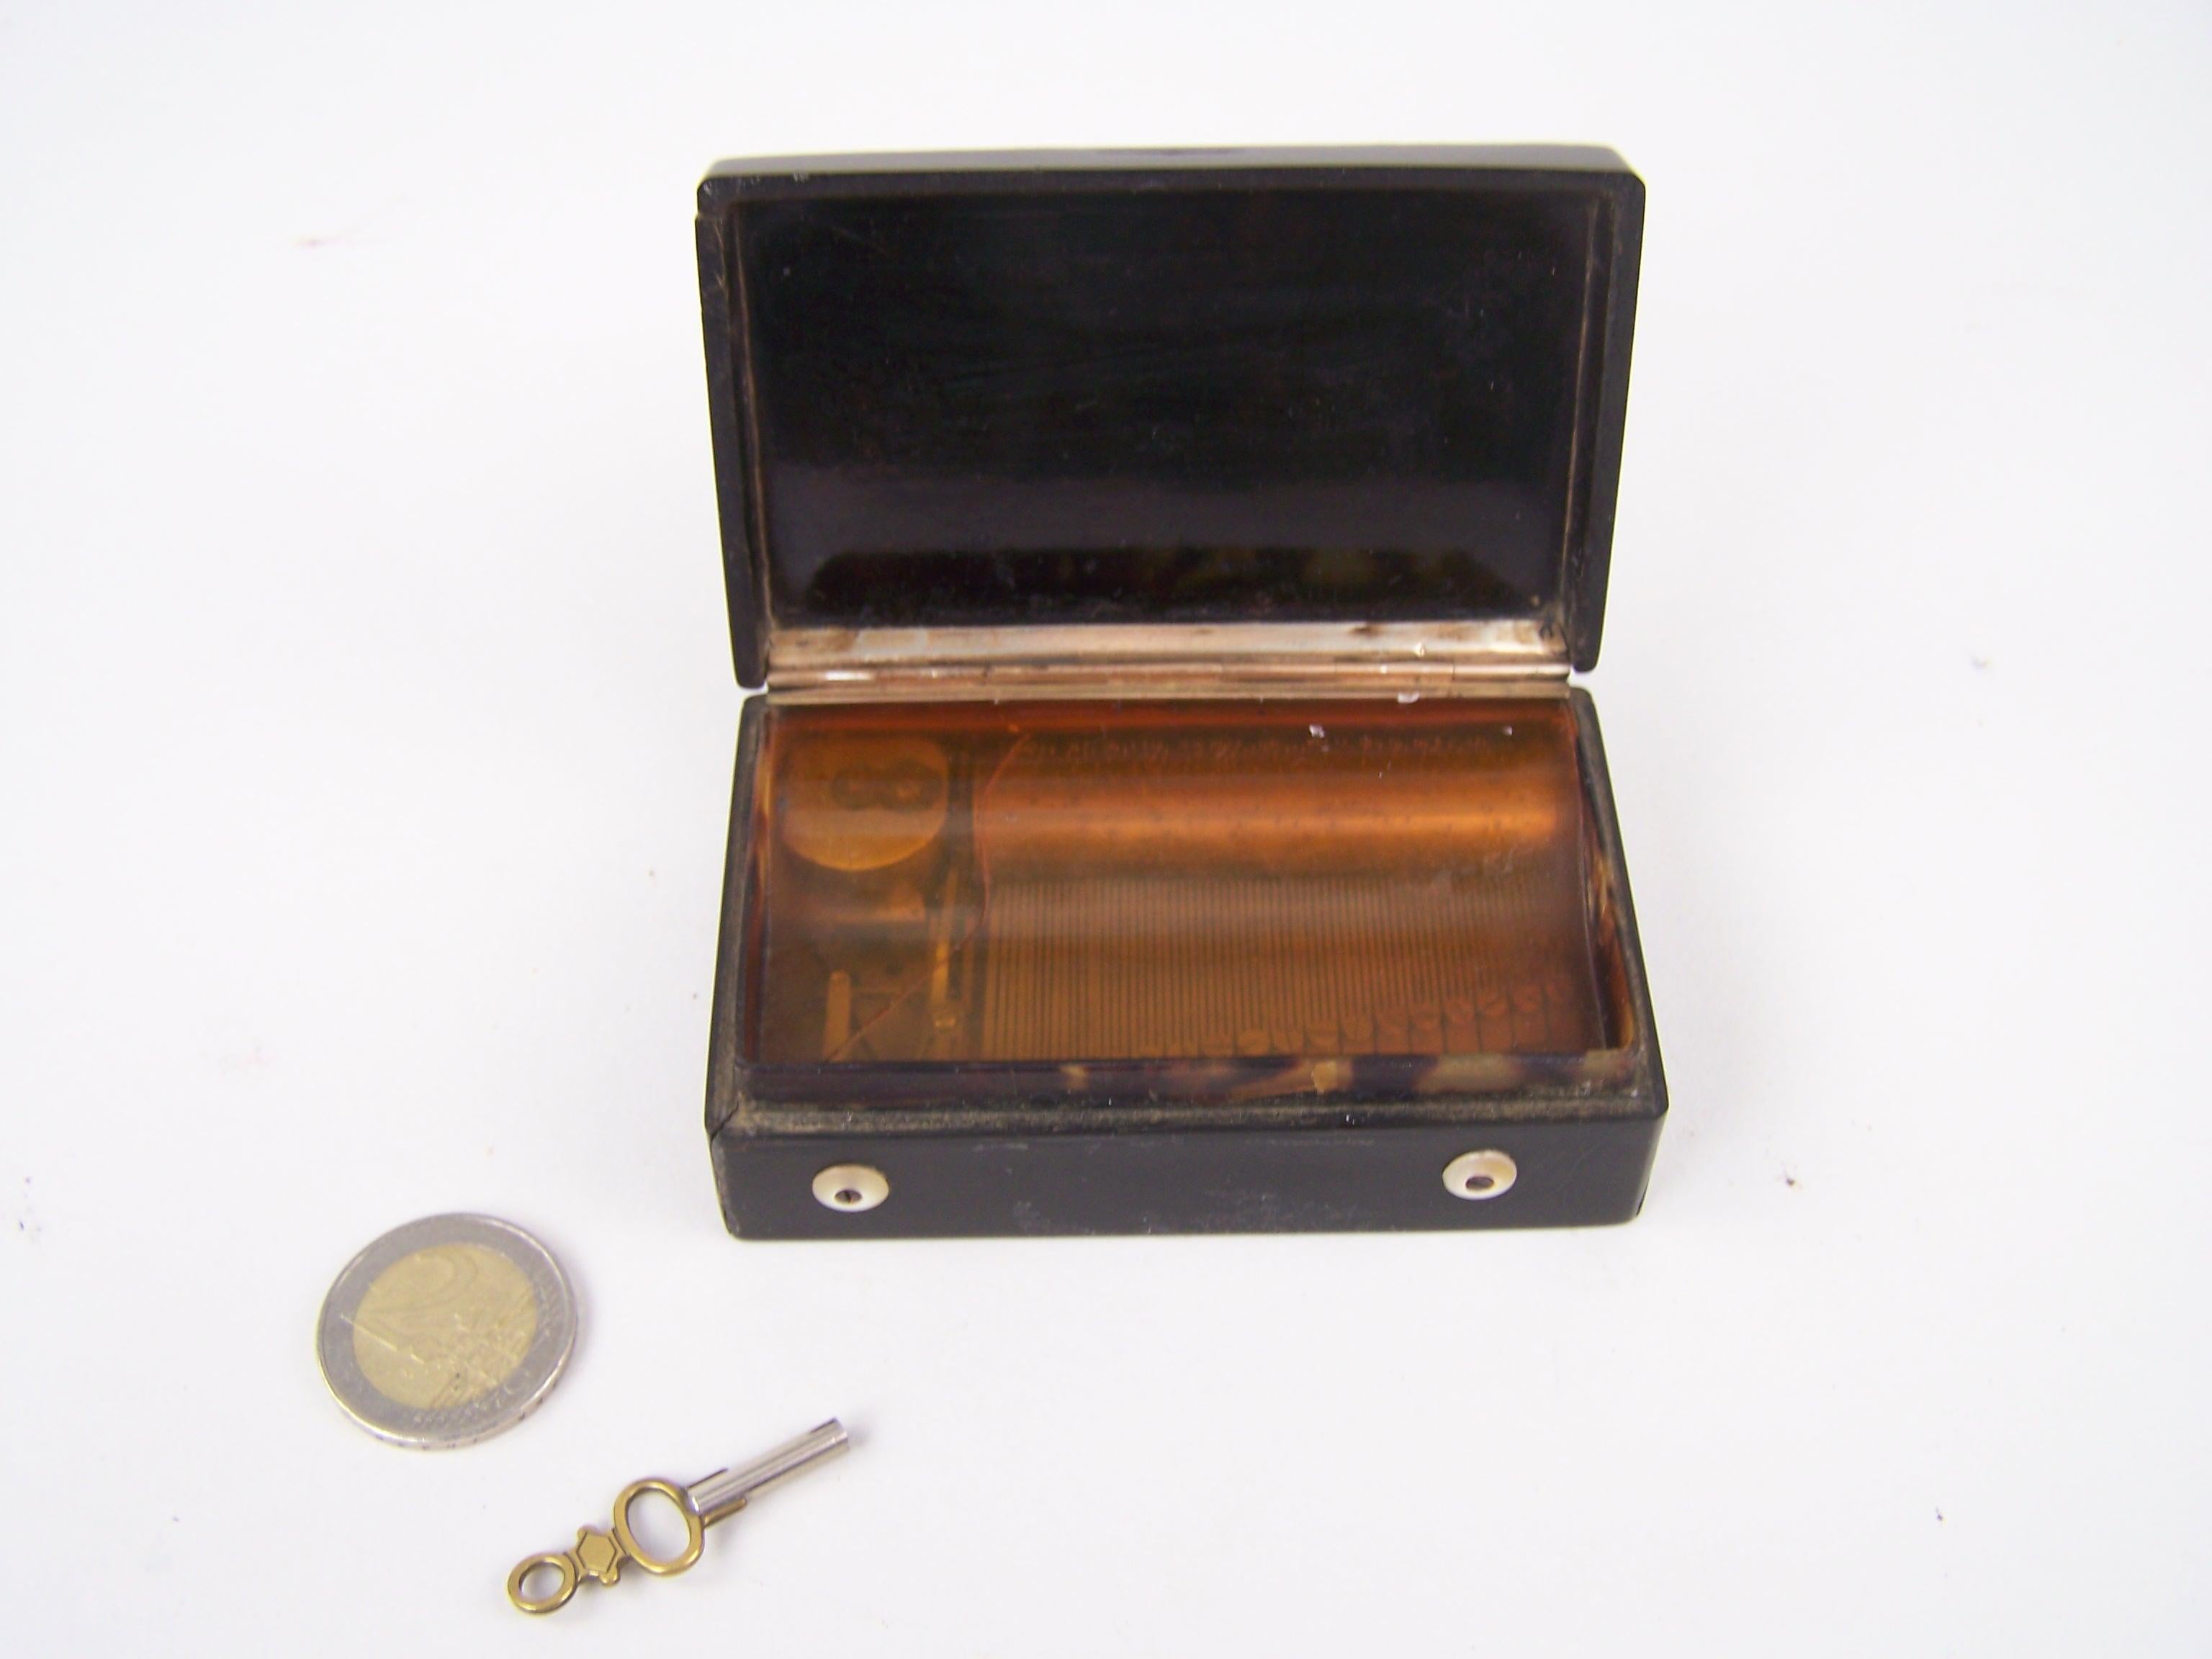 Snuffbox with music made in Switzerland in the first half of the 19th century.

This rare snuffbox plays 2 melodies, on a sectional comb. The comb is thus composed of several sections of 4 teeth each. this is typical of early boxes. It is only